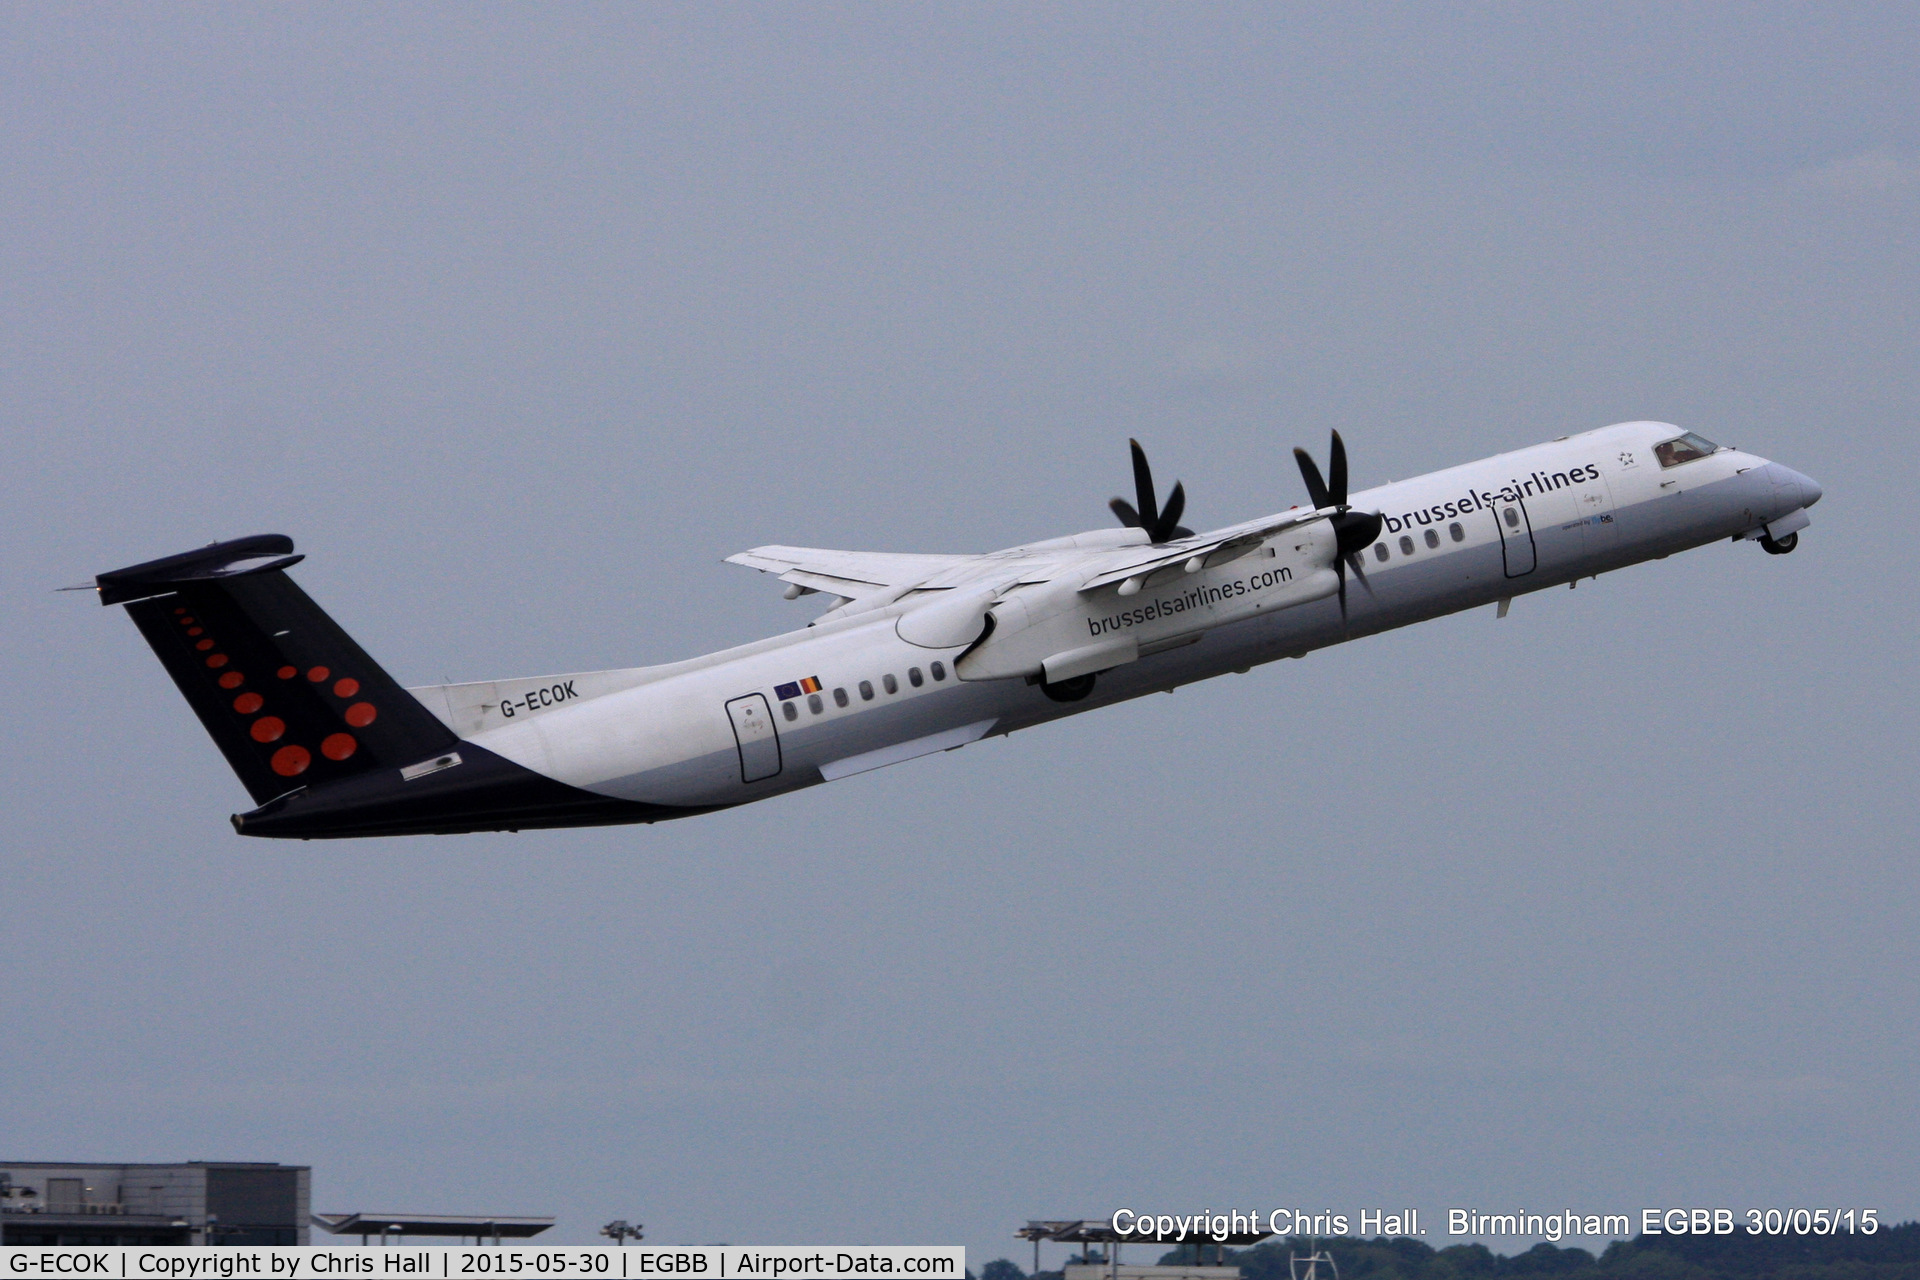 G-ECOK, 2008 Bombardier DHC-8-402Q Dash 8 C/N 4230, Brussels Airlines